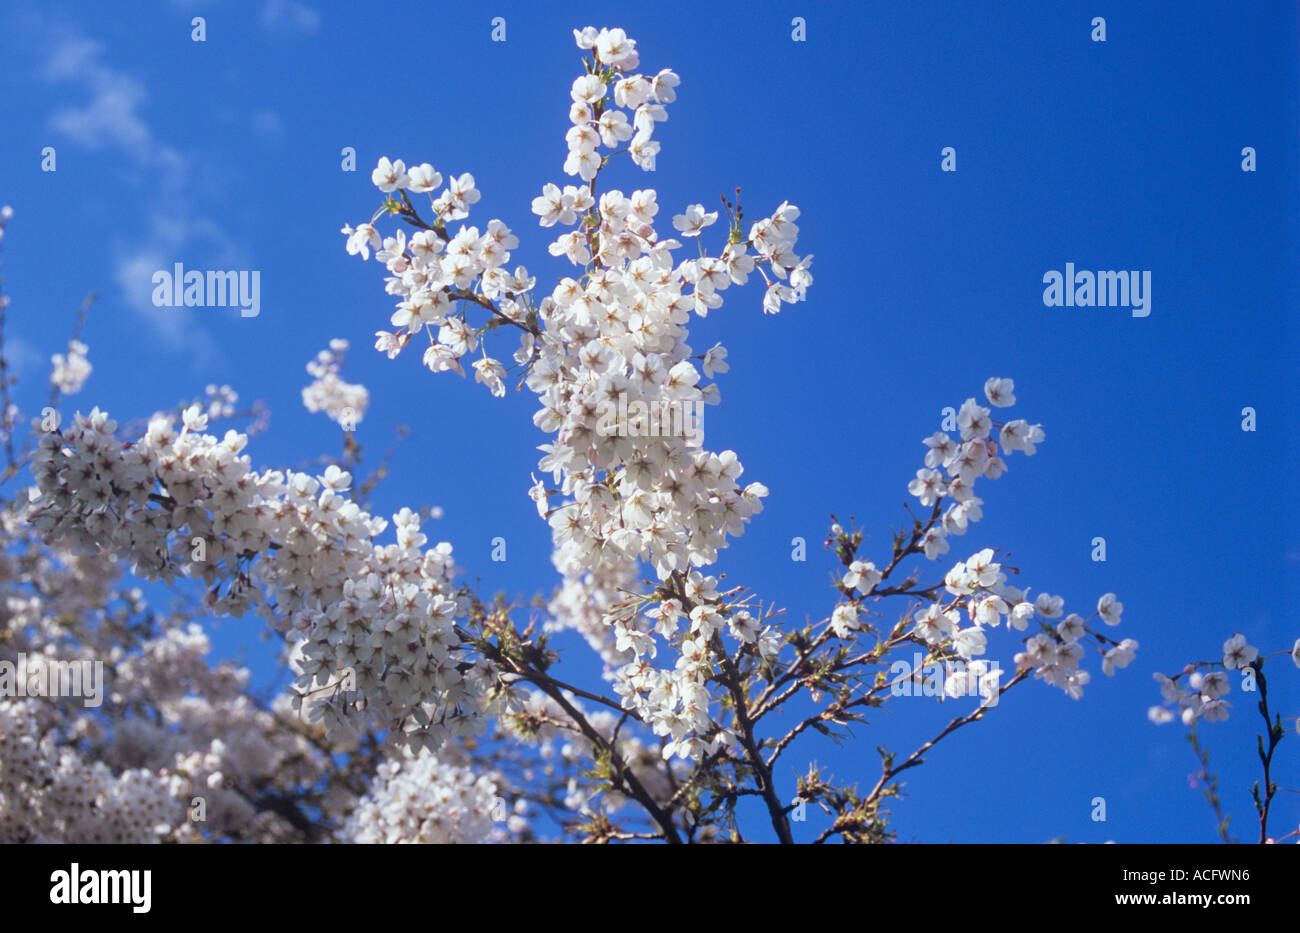 Close up of clusters of early spring white flowers of the Flowering Fuji cherry or Prunus incisa tree against bright blue sky Stock Photo